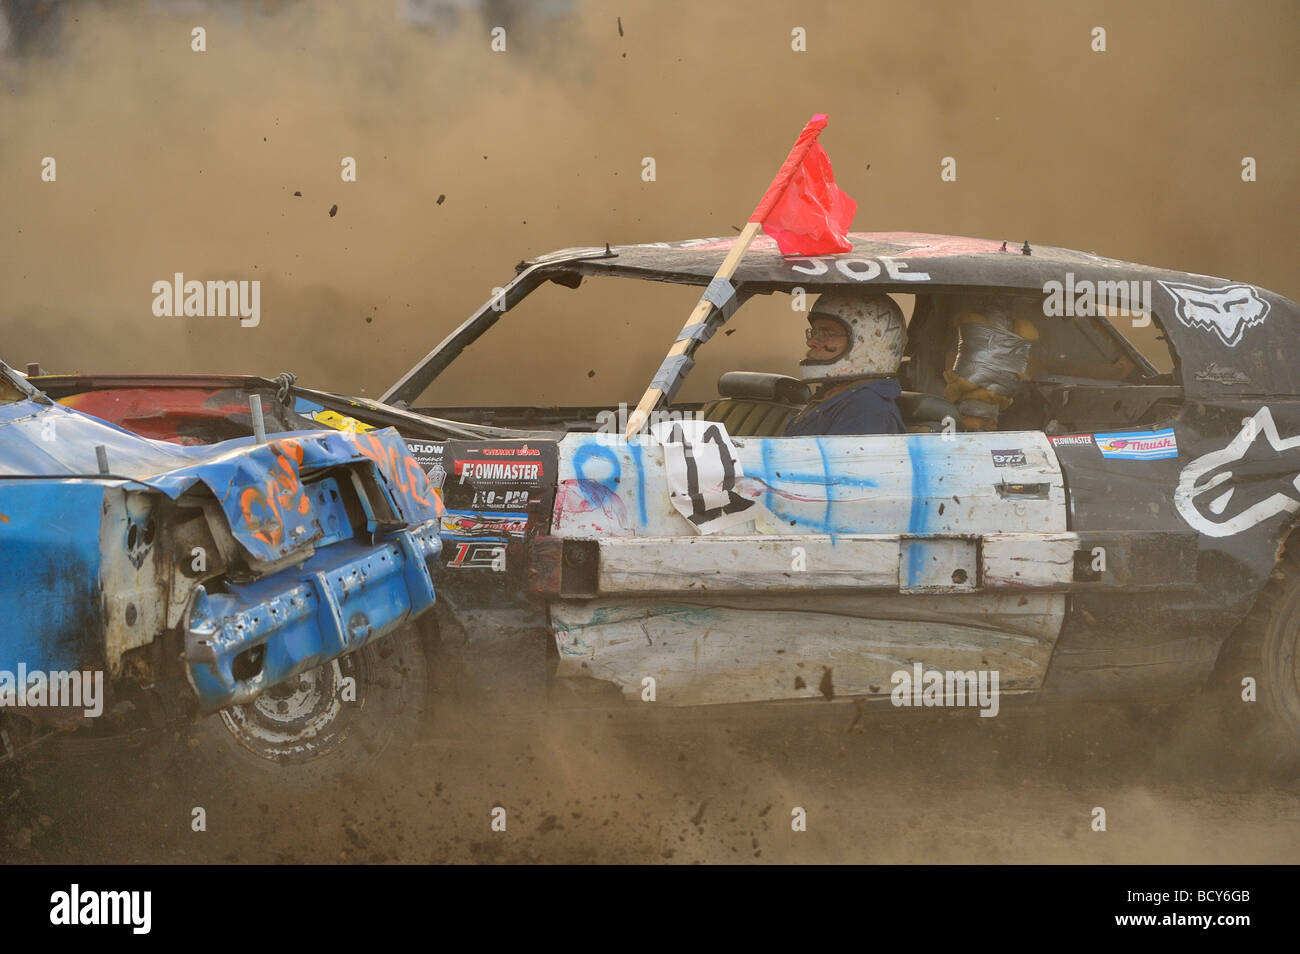 Close up image of a demolition car at a demolition derby on a dusty track in Alberta Canada Stock Photo